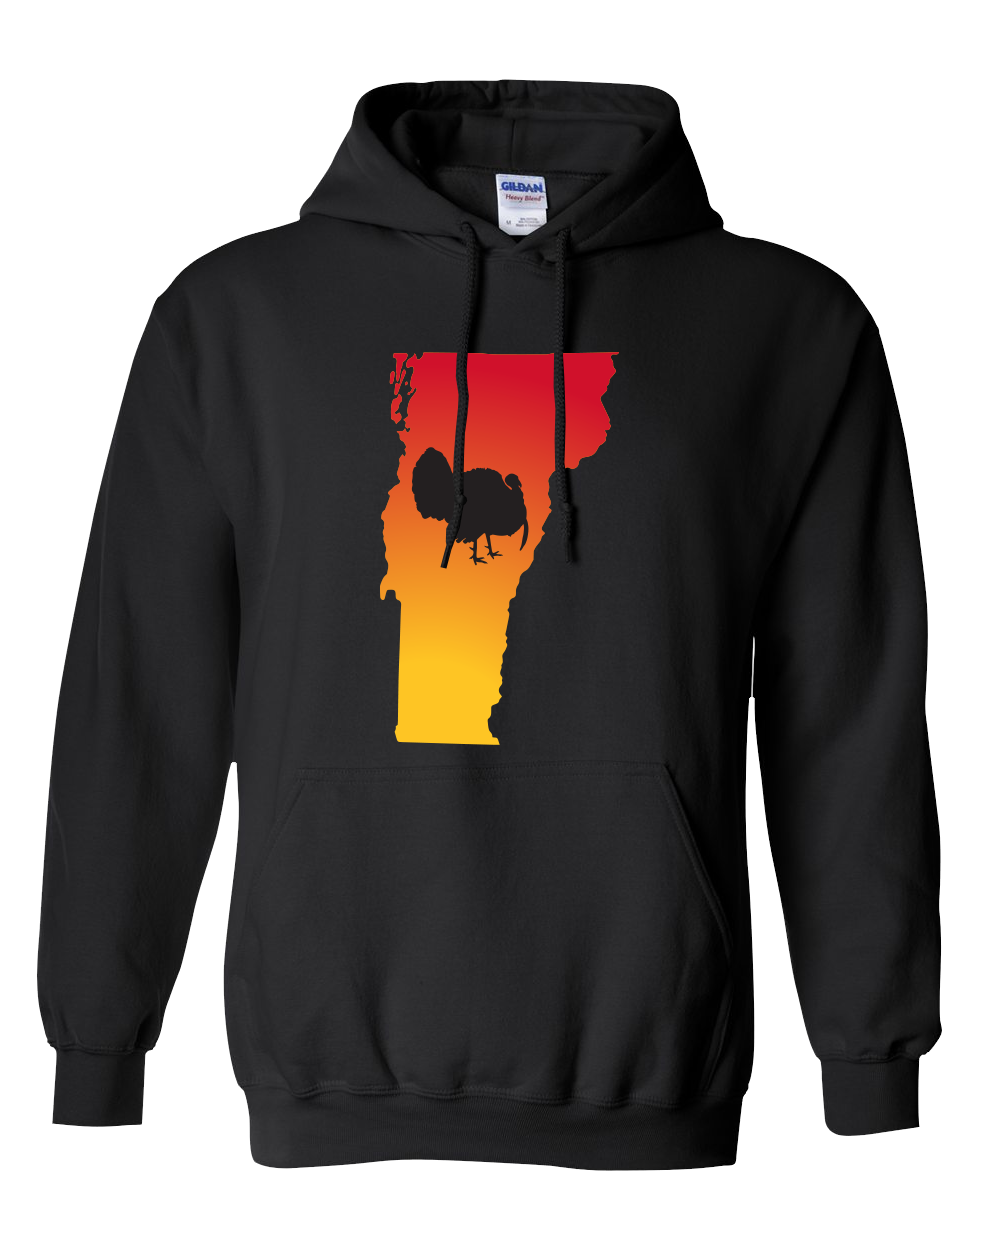 Pullover Hooded Sweatshirt Vermont Black Turkey Vibrant Design High Quality Tight Knit Ring Spun Low Maintenance Cotton Printed With The Newest Available Color Transfer Technology